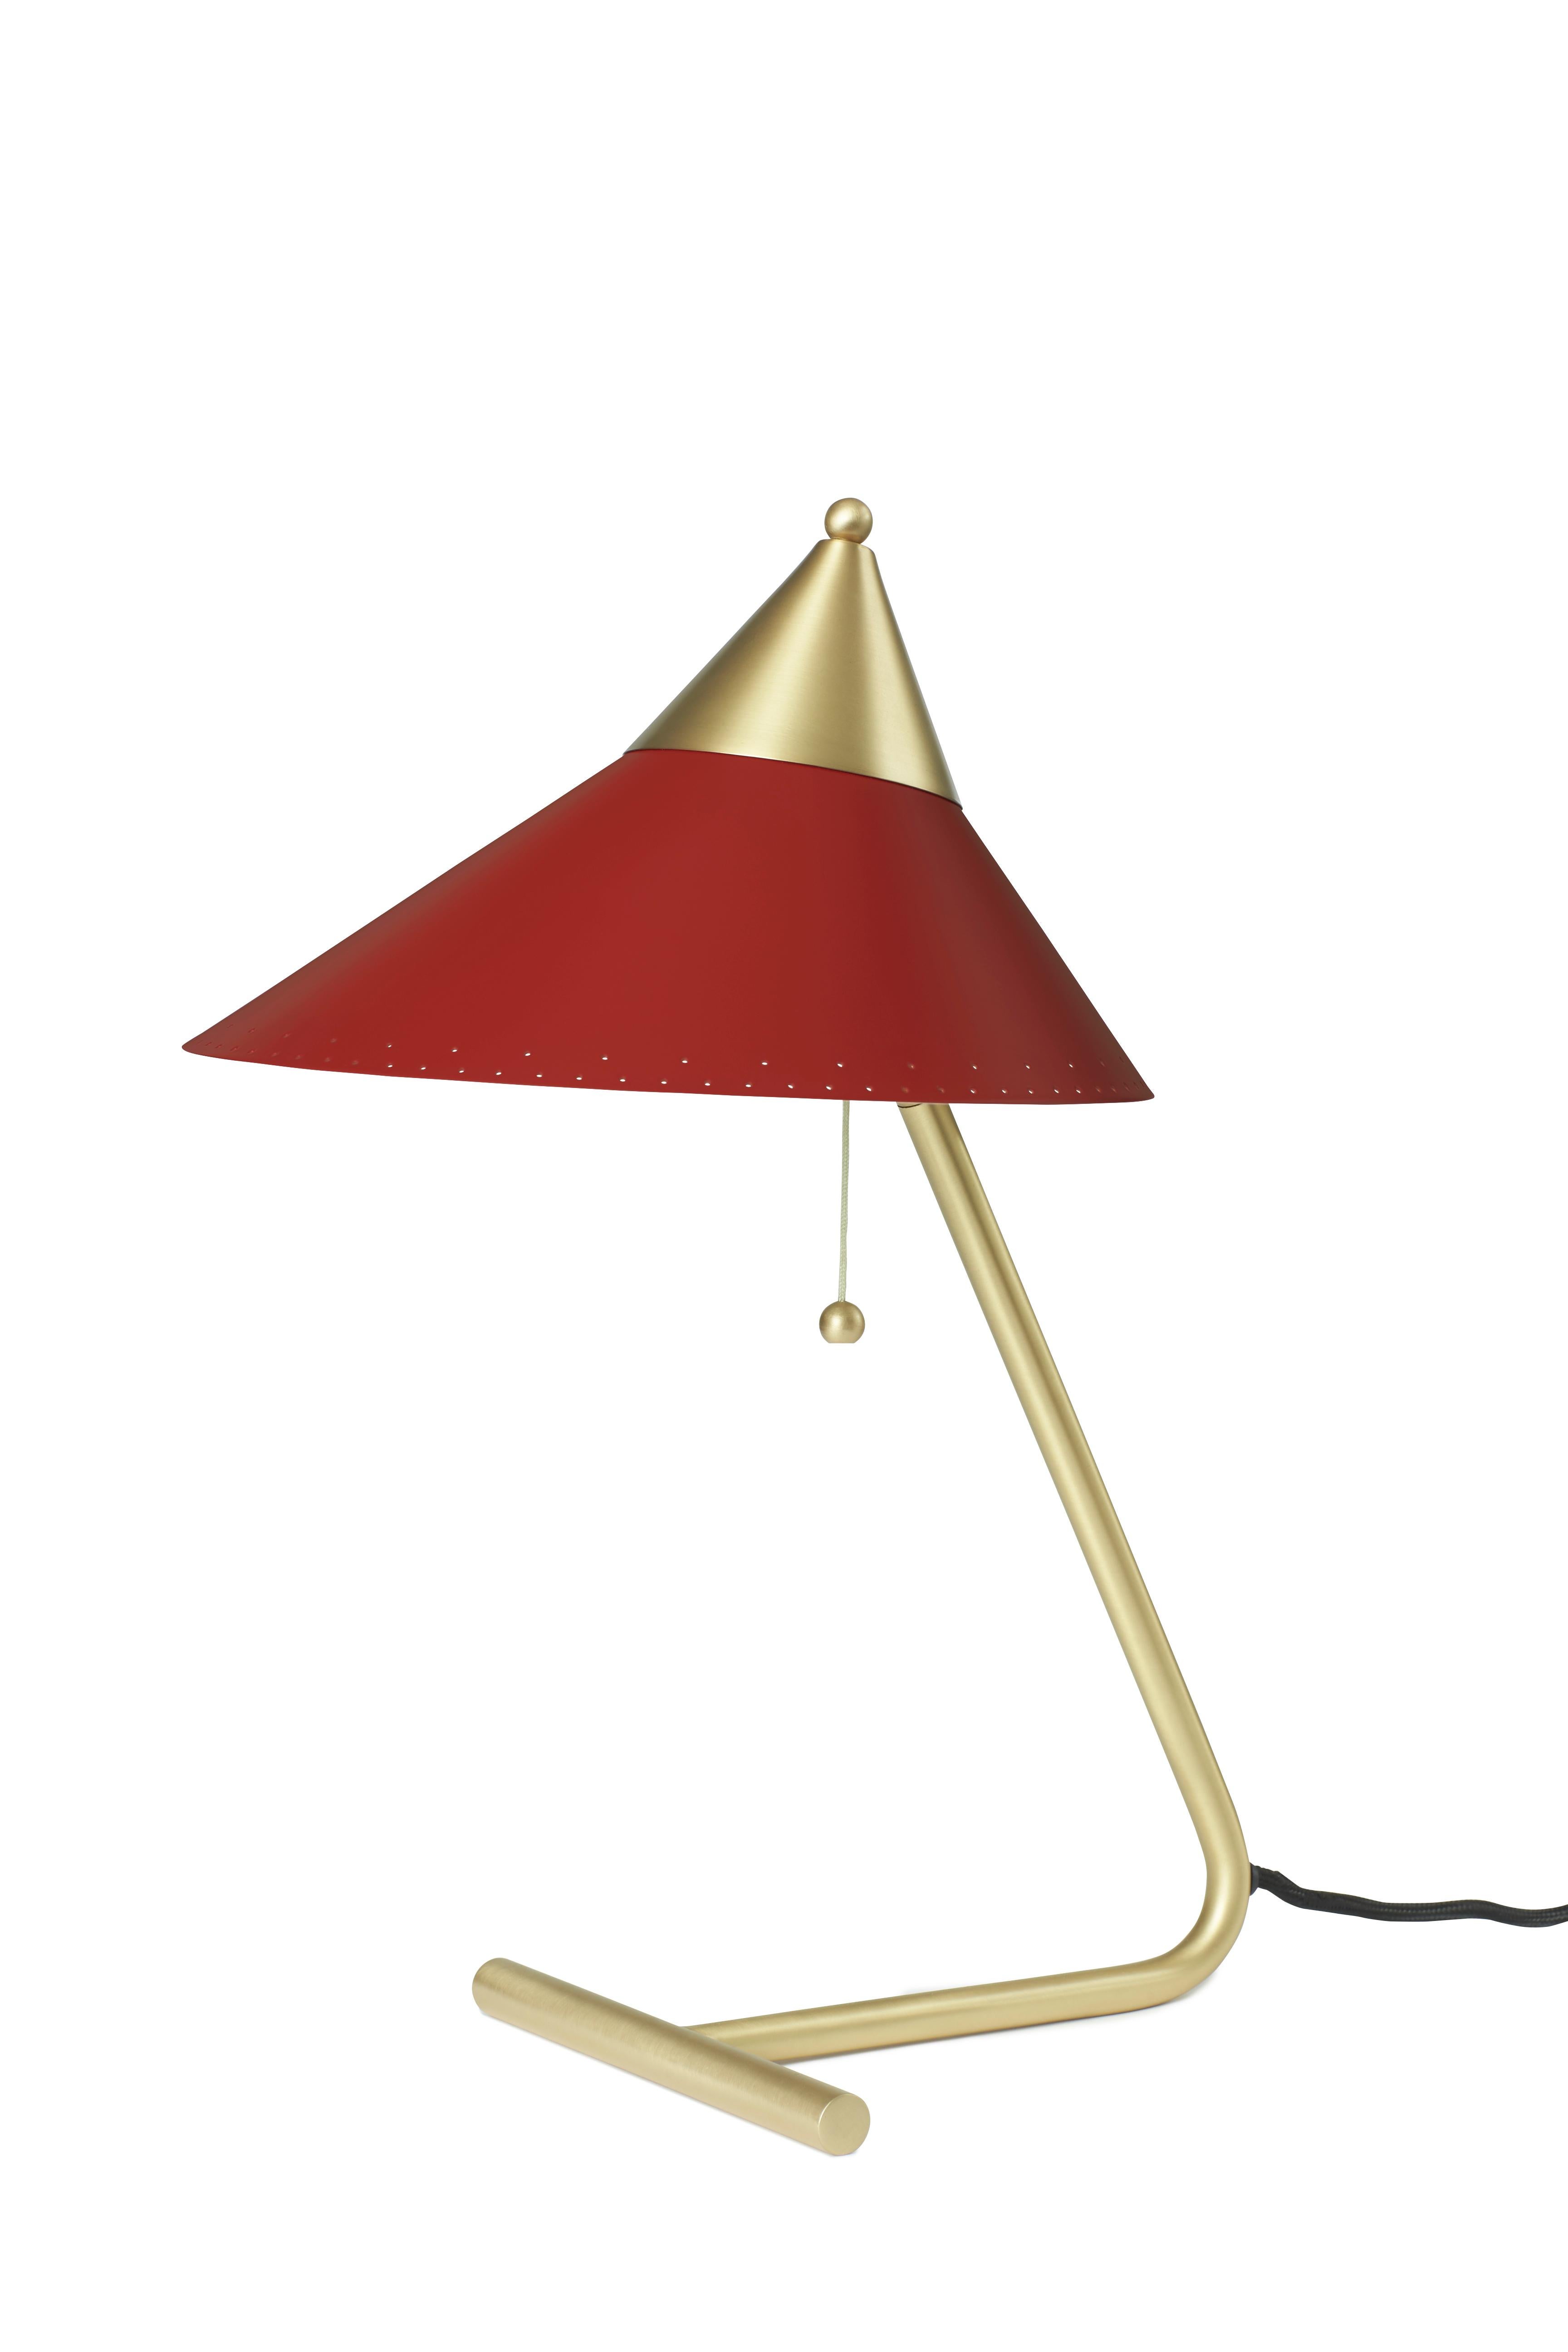 For Sale: Red (Red Grape) Brass Top Table Lamp, by Svend Aage Holm Sorensen from Warm Nordic